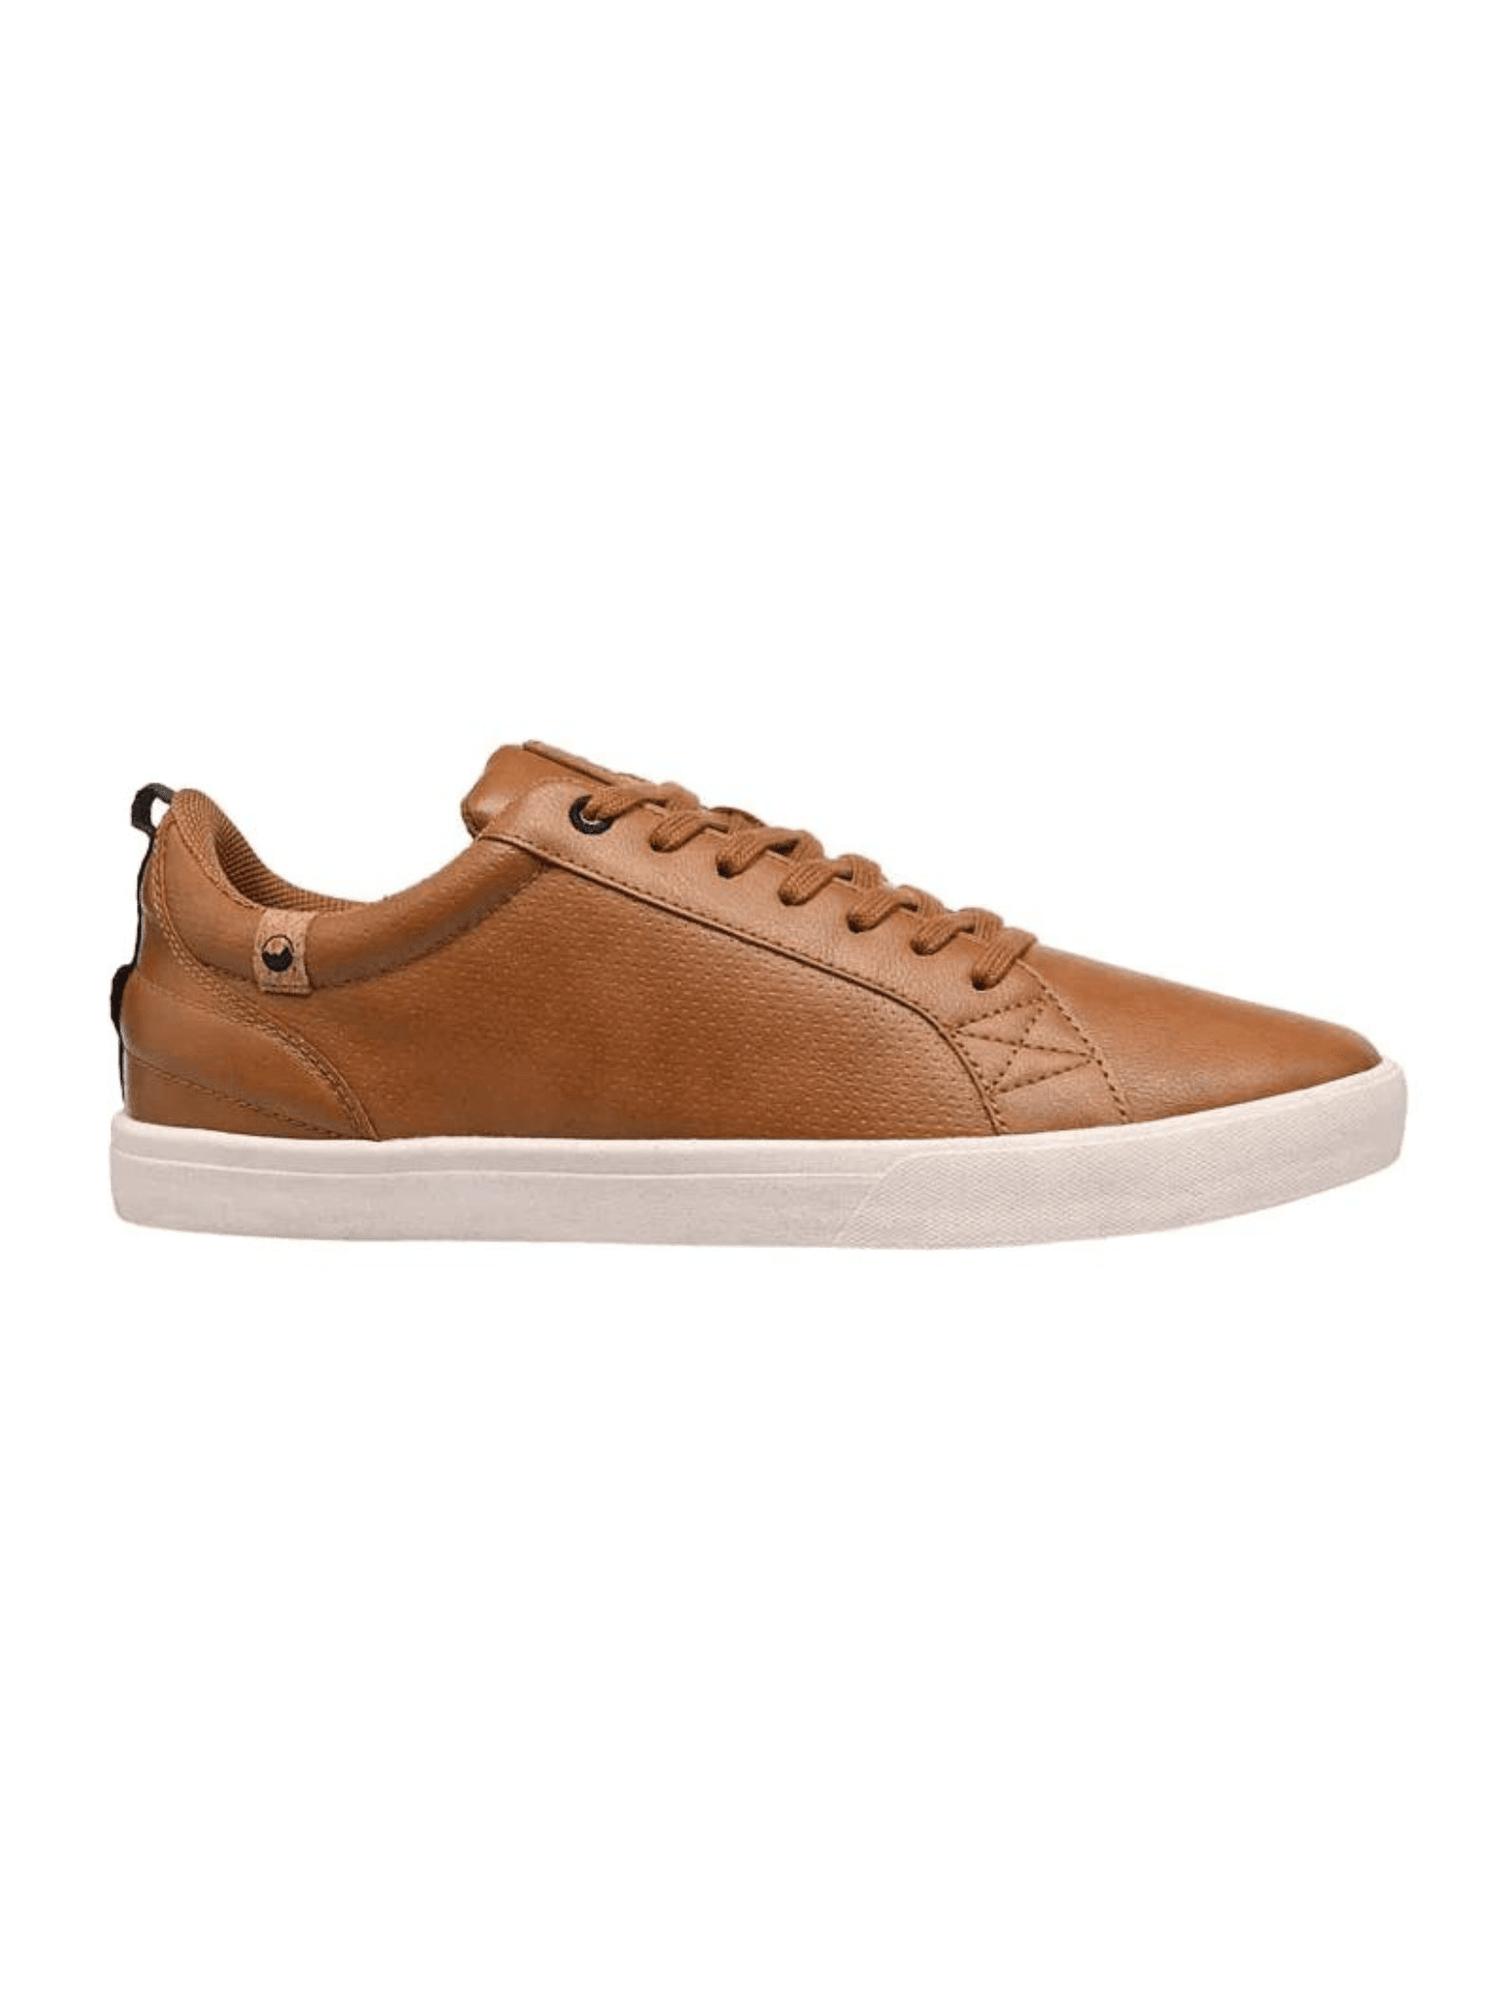 Saola M's Cannon Vegan Leather - Recycled PET Camel Shoes